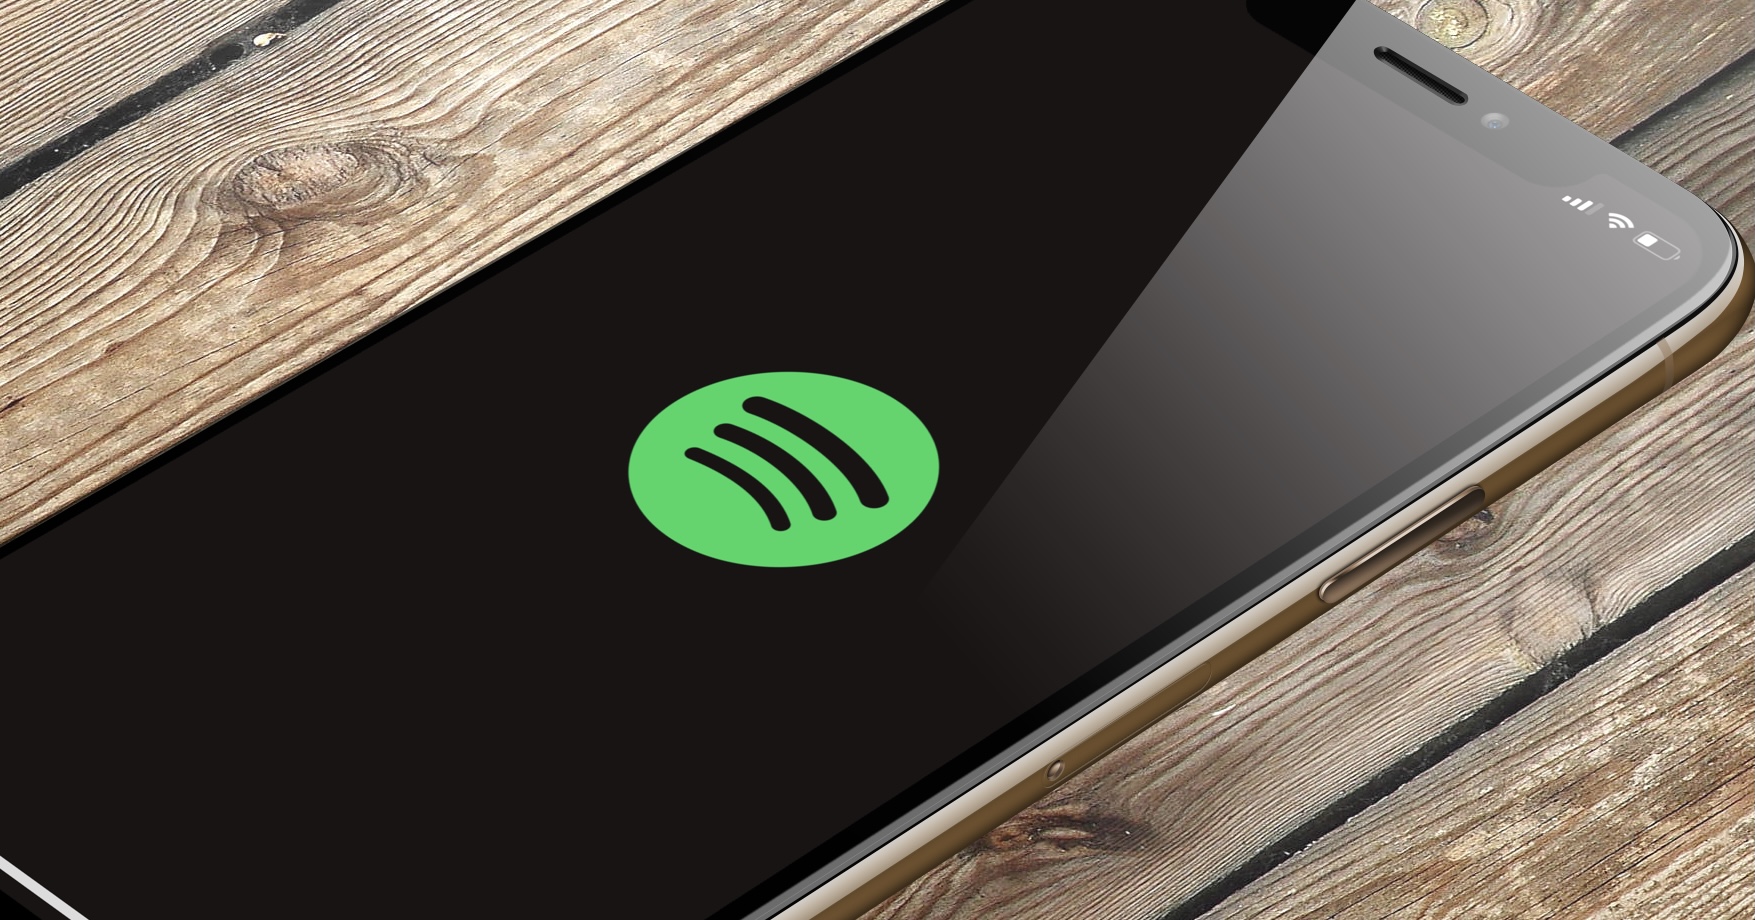 instal the new for ios Spotify 1.2.13.661